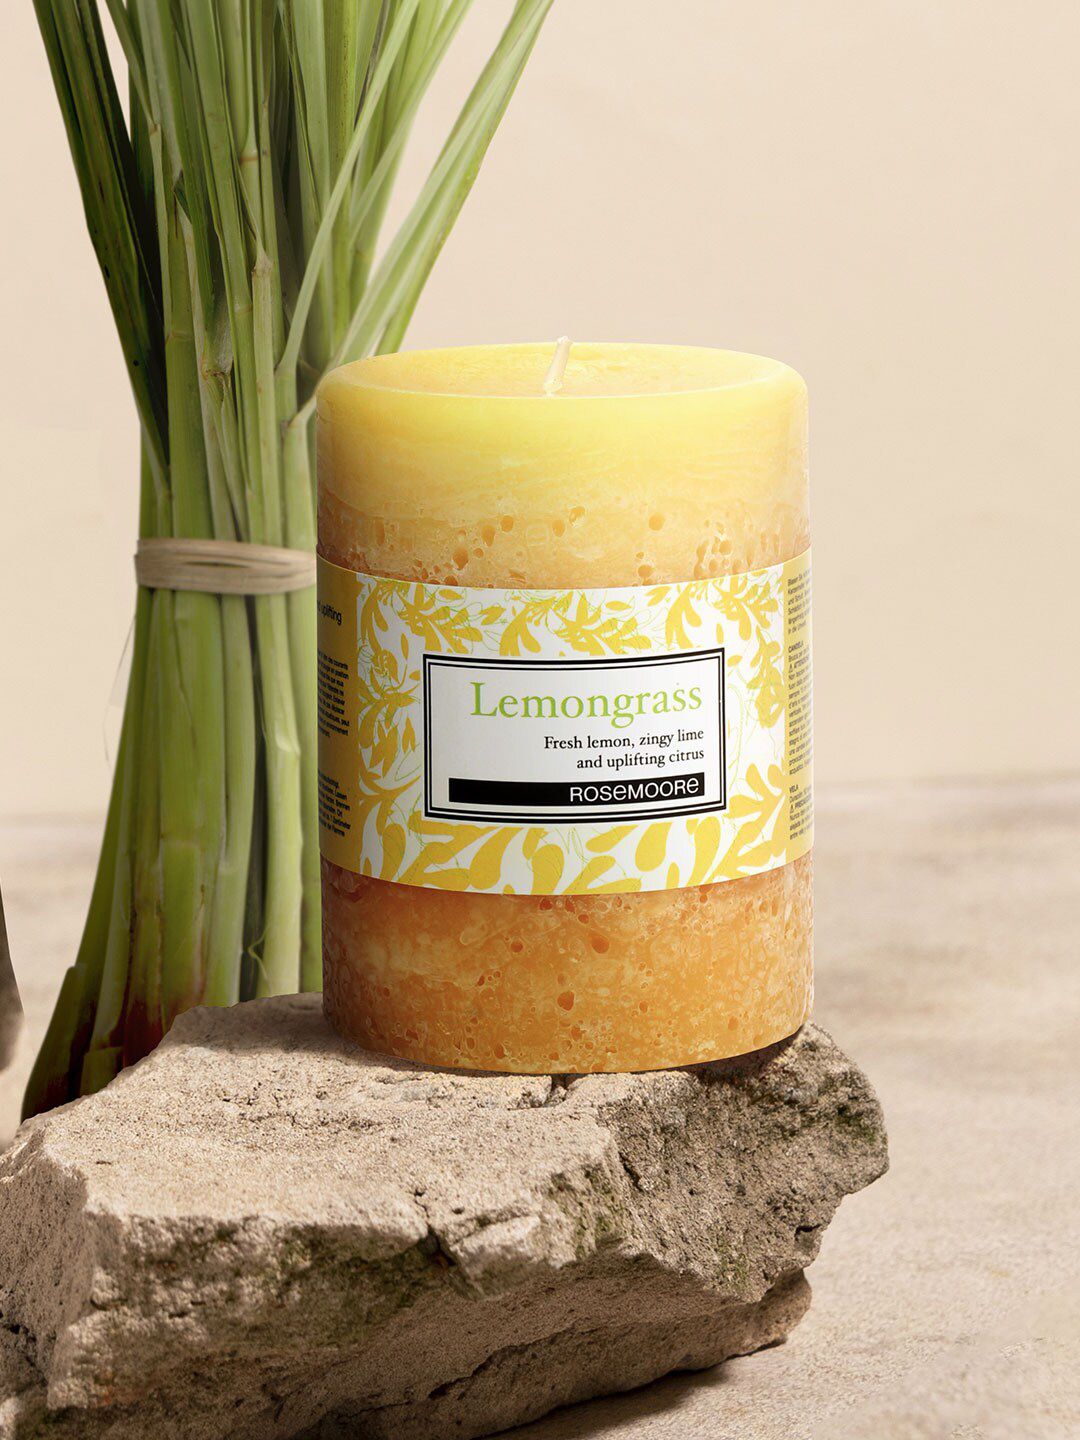 ROSEMOORe Yellow Lemongrass Scented Solid Candle Price in India